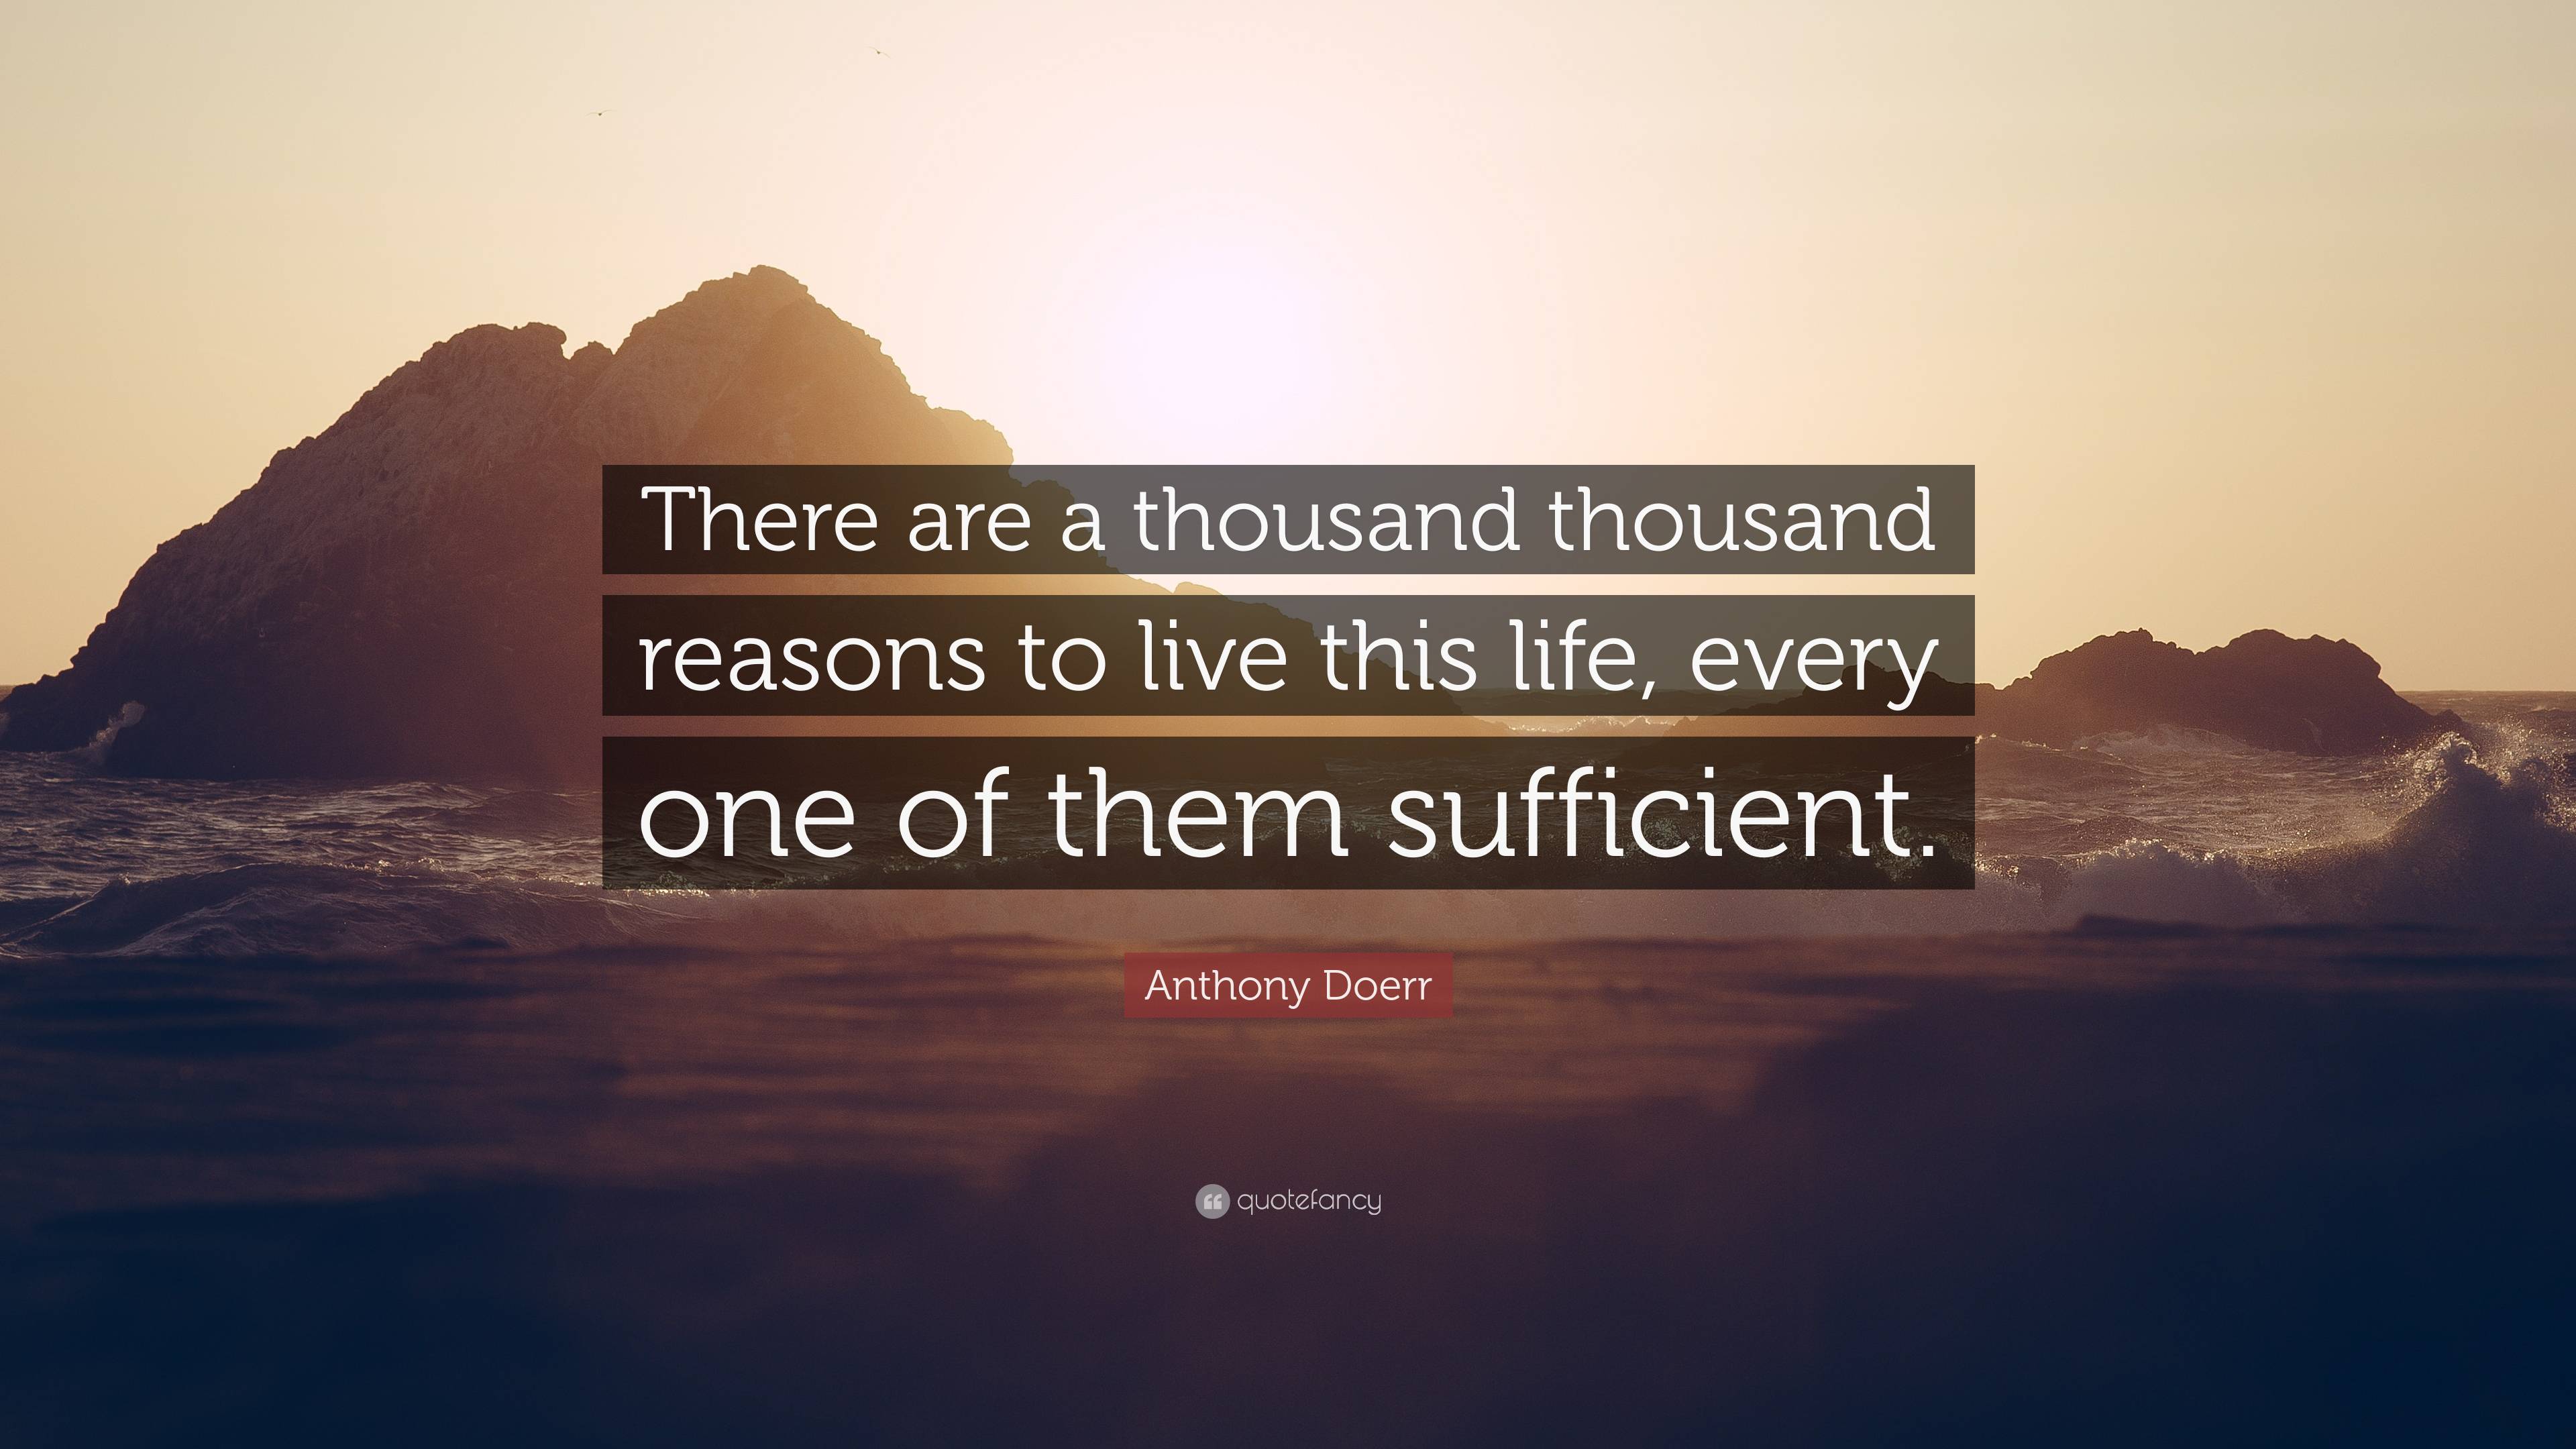 Anthony Doerr Quote: “There are a thousand thousand reasons to live ...